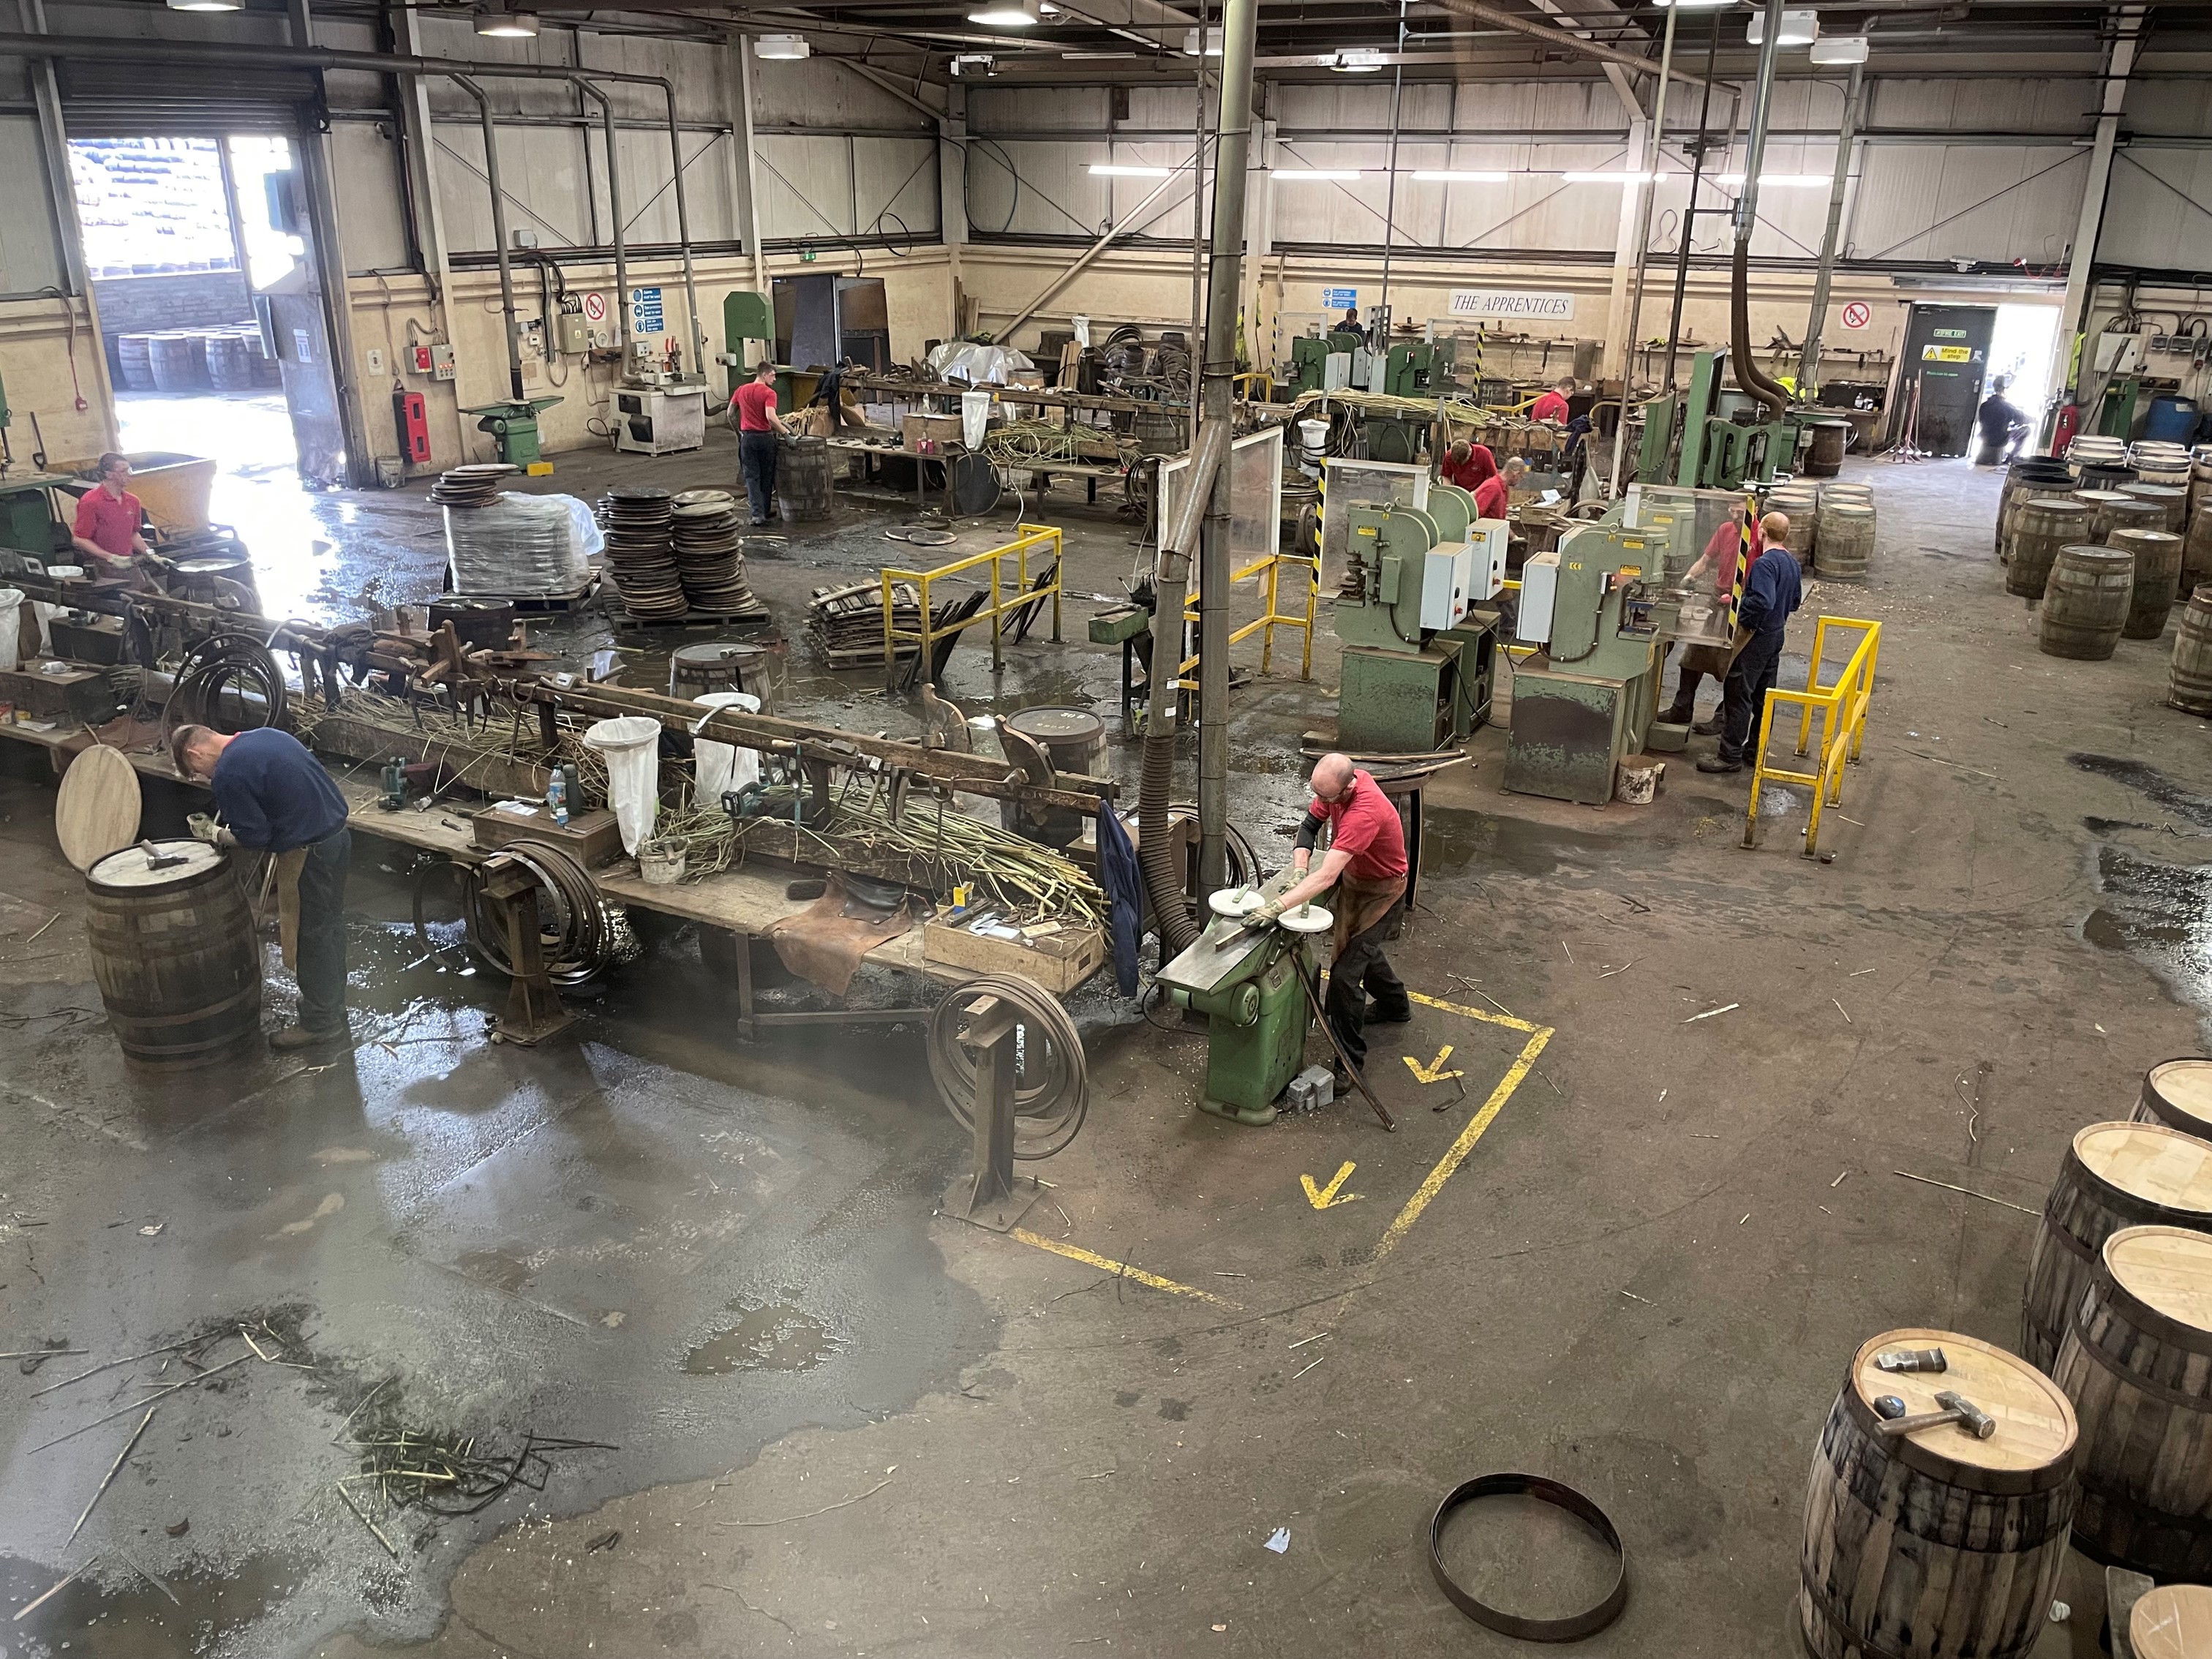 A hive of activity (and noise!) inside the world famous Speyside Cooperage